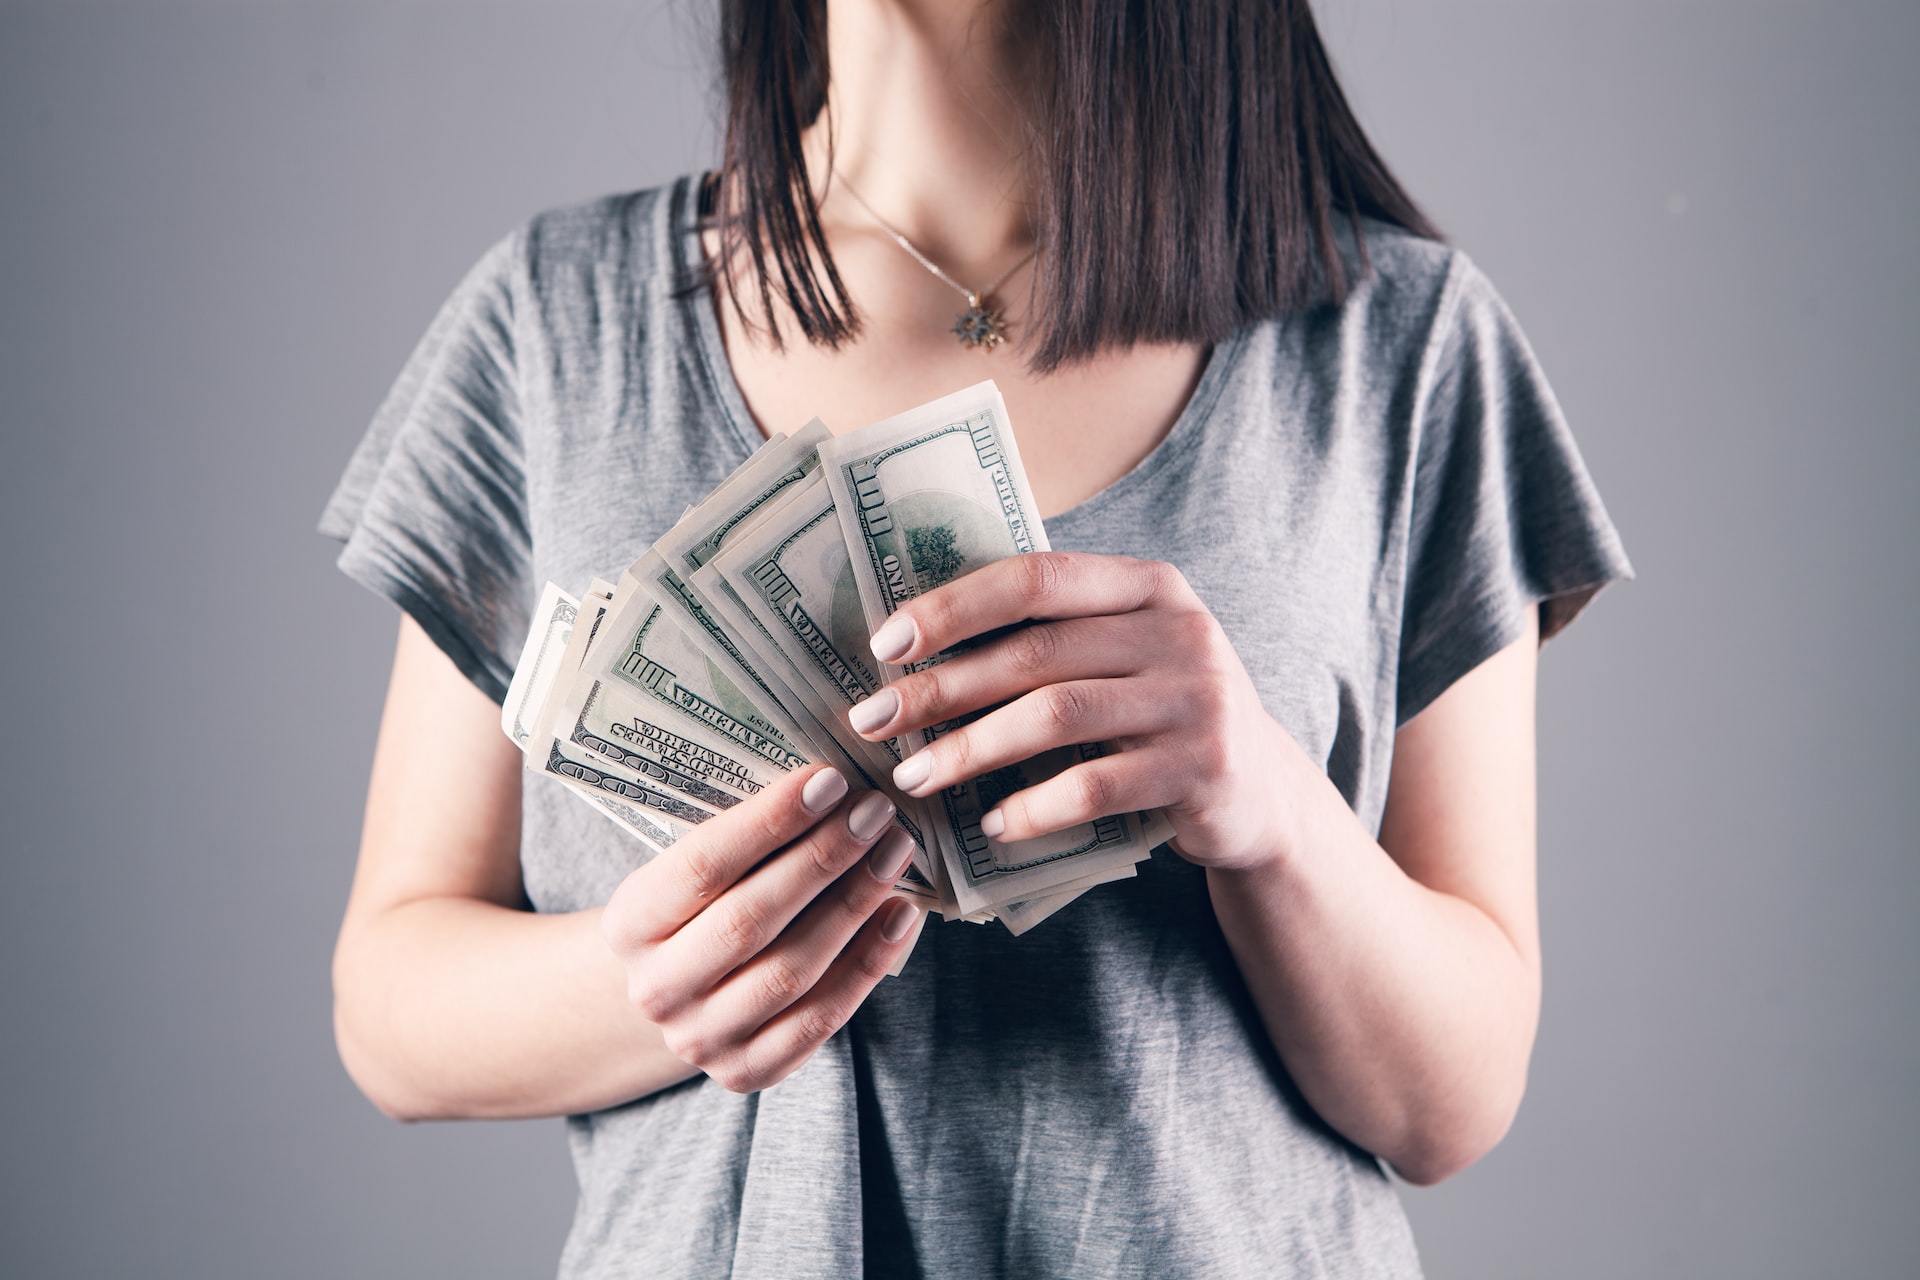 A woman in a gray shirt wearing a necklace holding US dollar bills